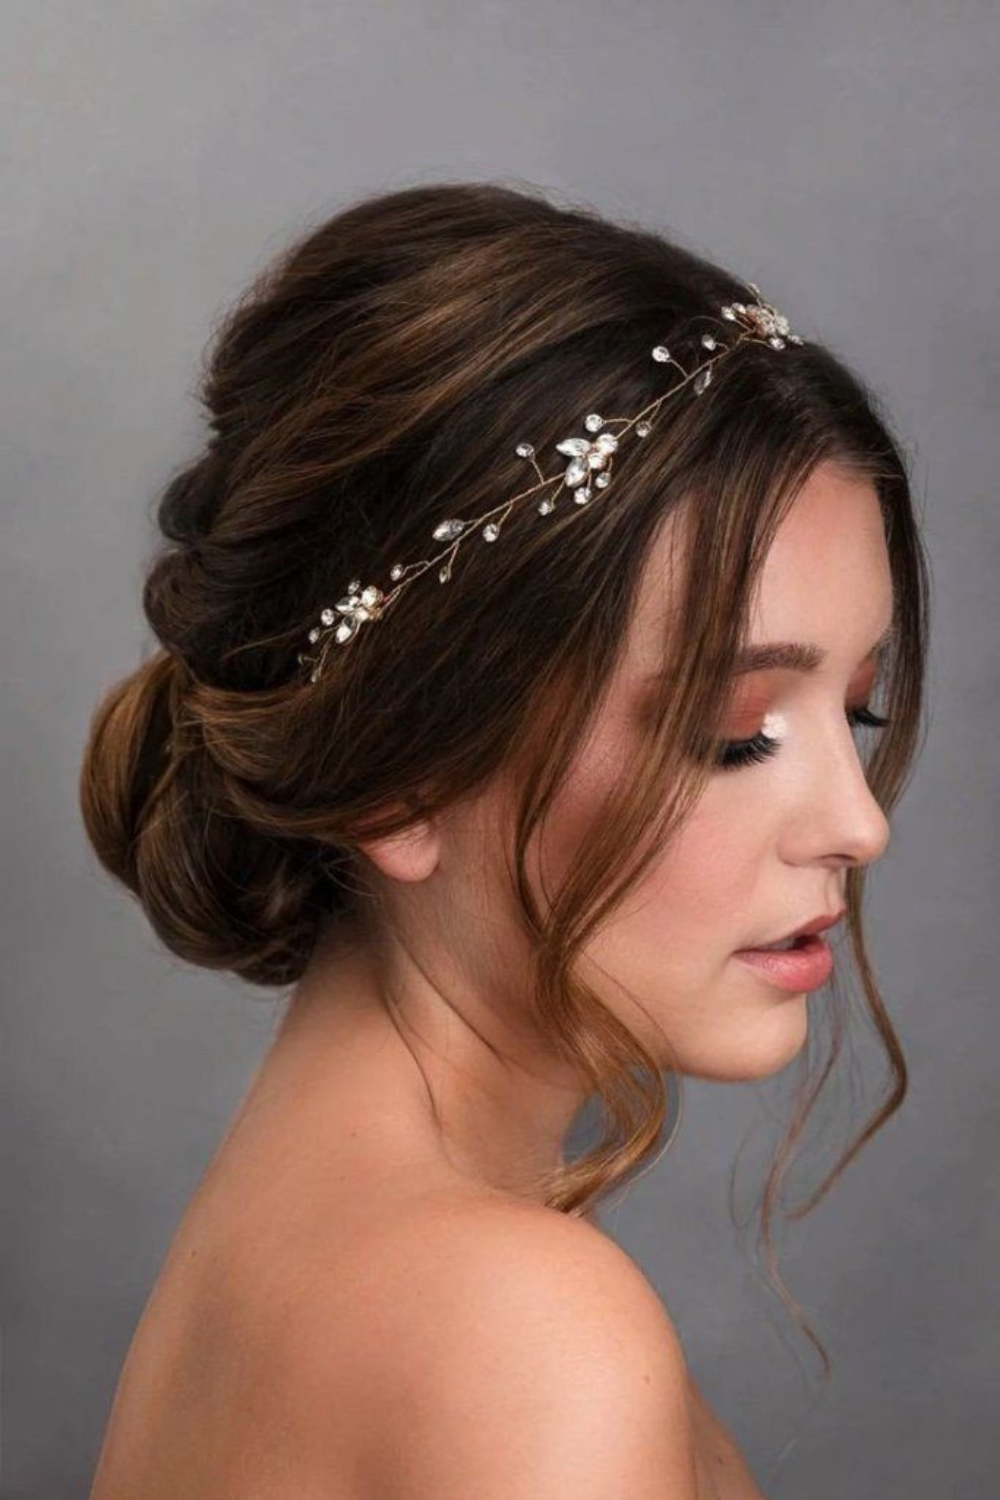 40 Wedding Hairstyles That Are Dreamy and Beautiful